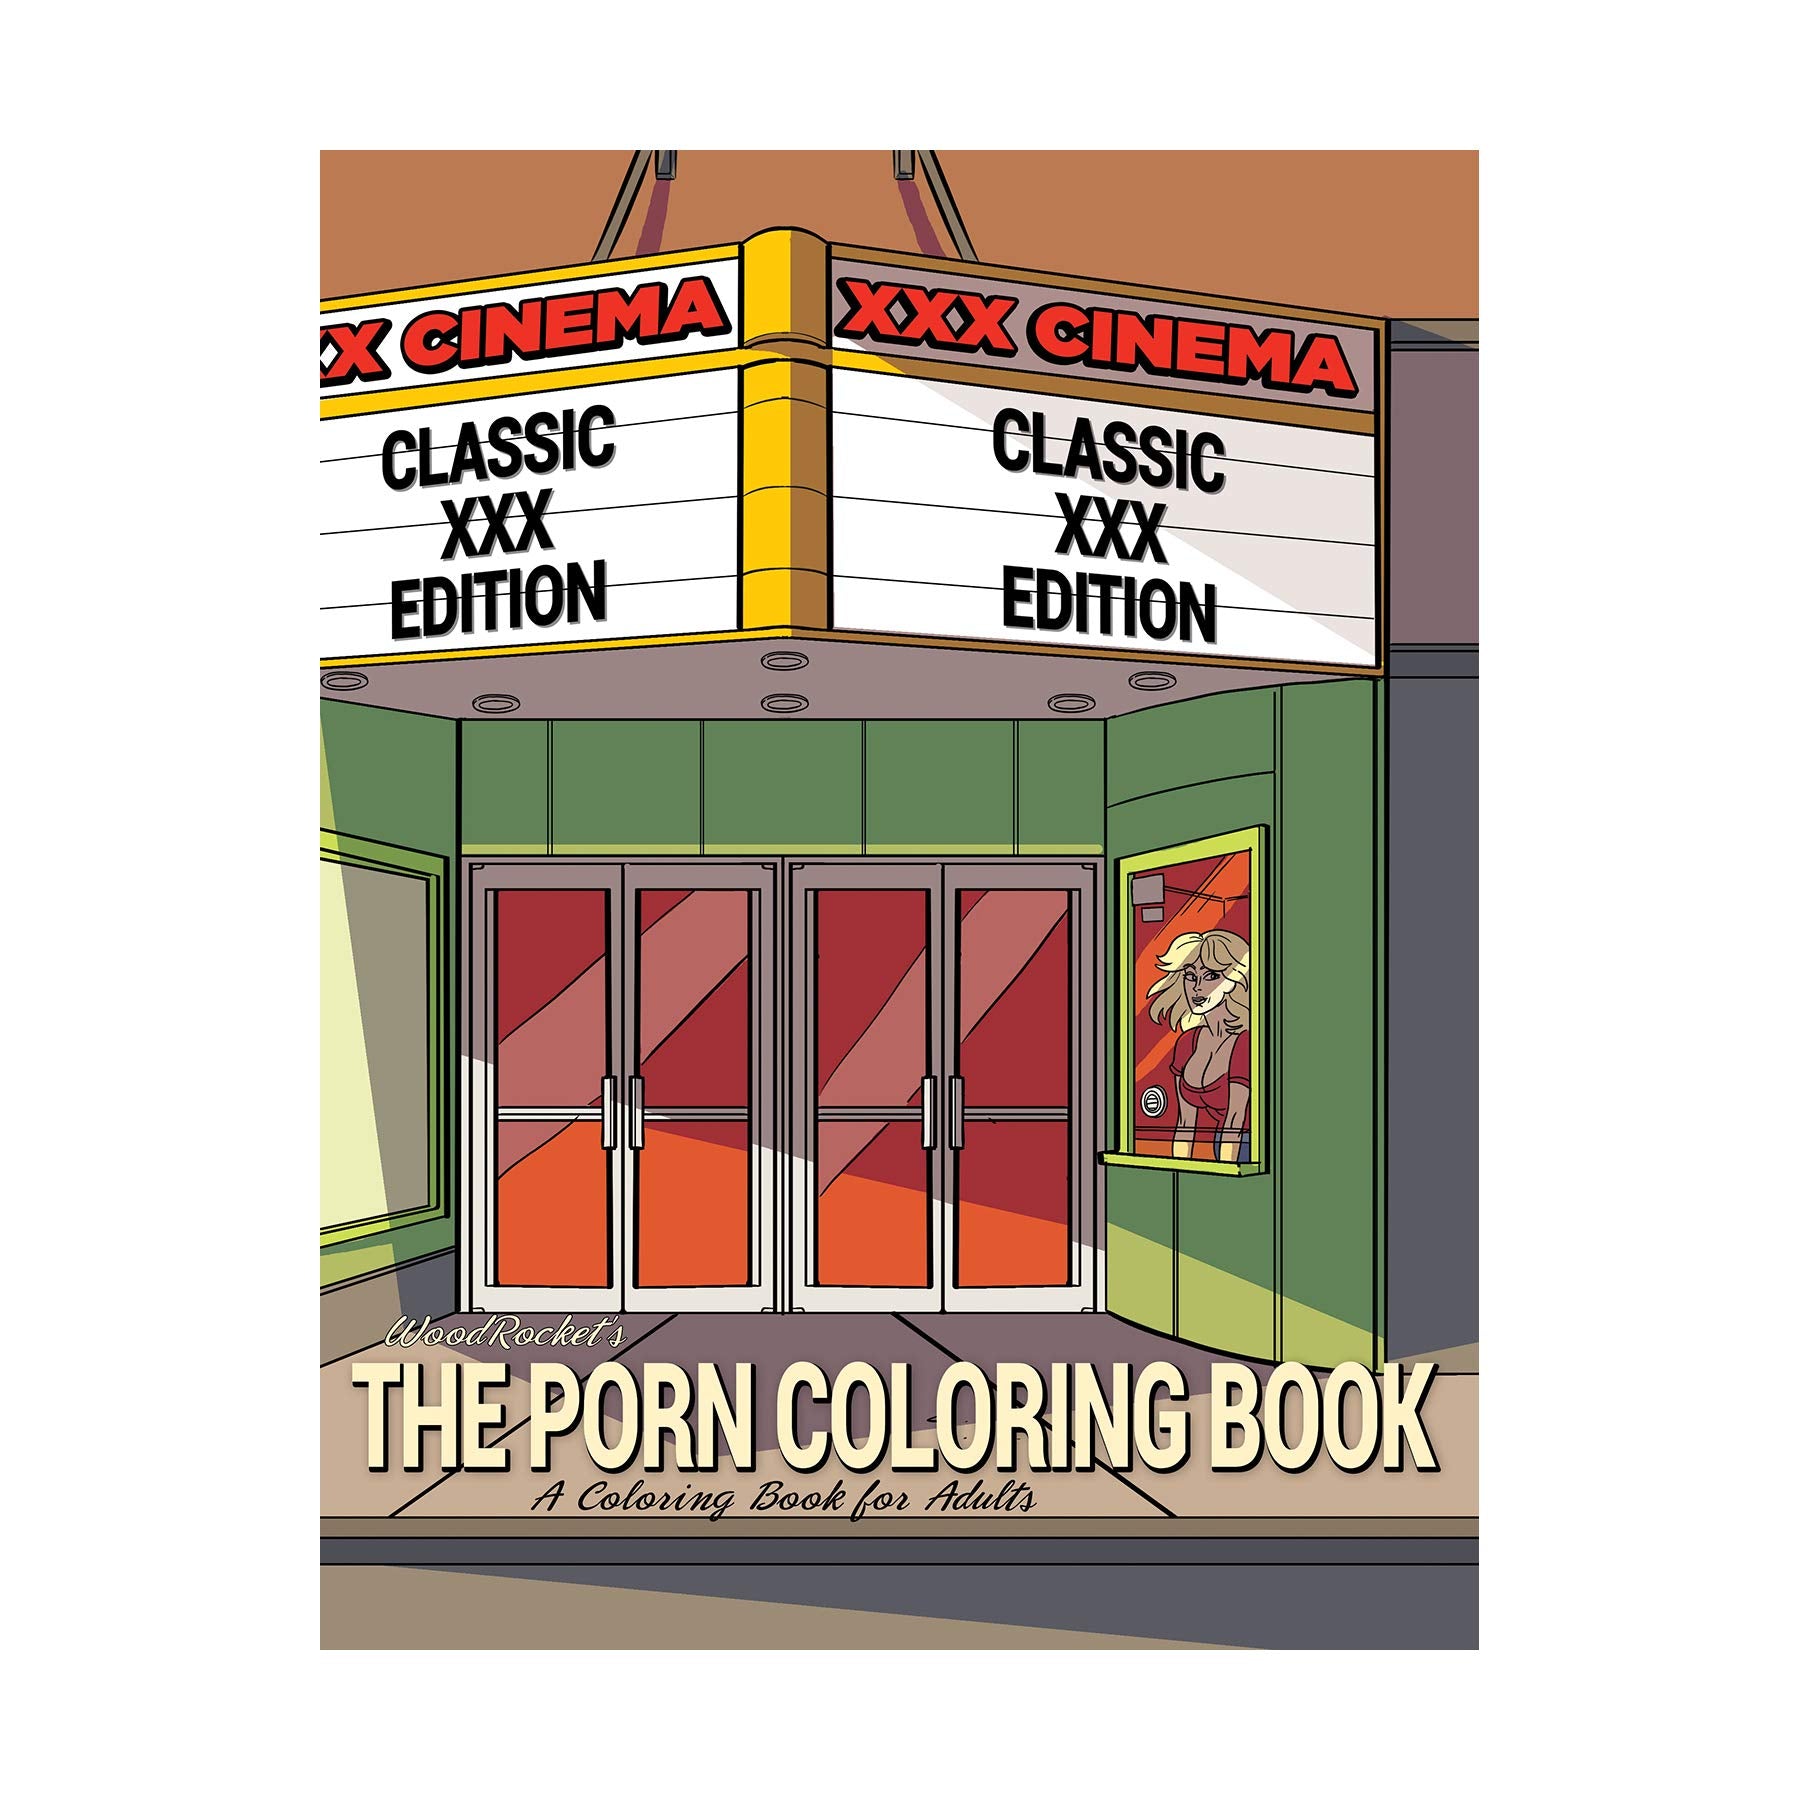 Vintage Xxx Paperbacks - SALE: Wood Rocket, The Porn Coloring Book Classic XXX Edition, $19.99, FREE  SHIPPING